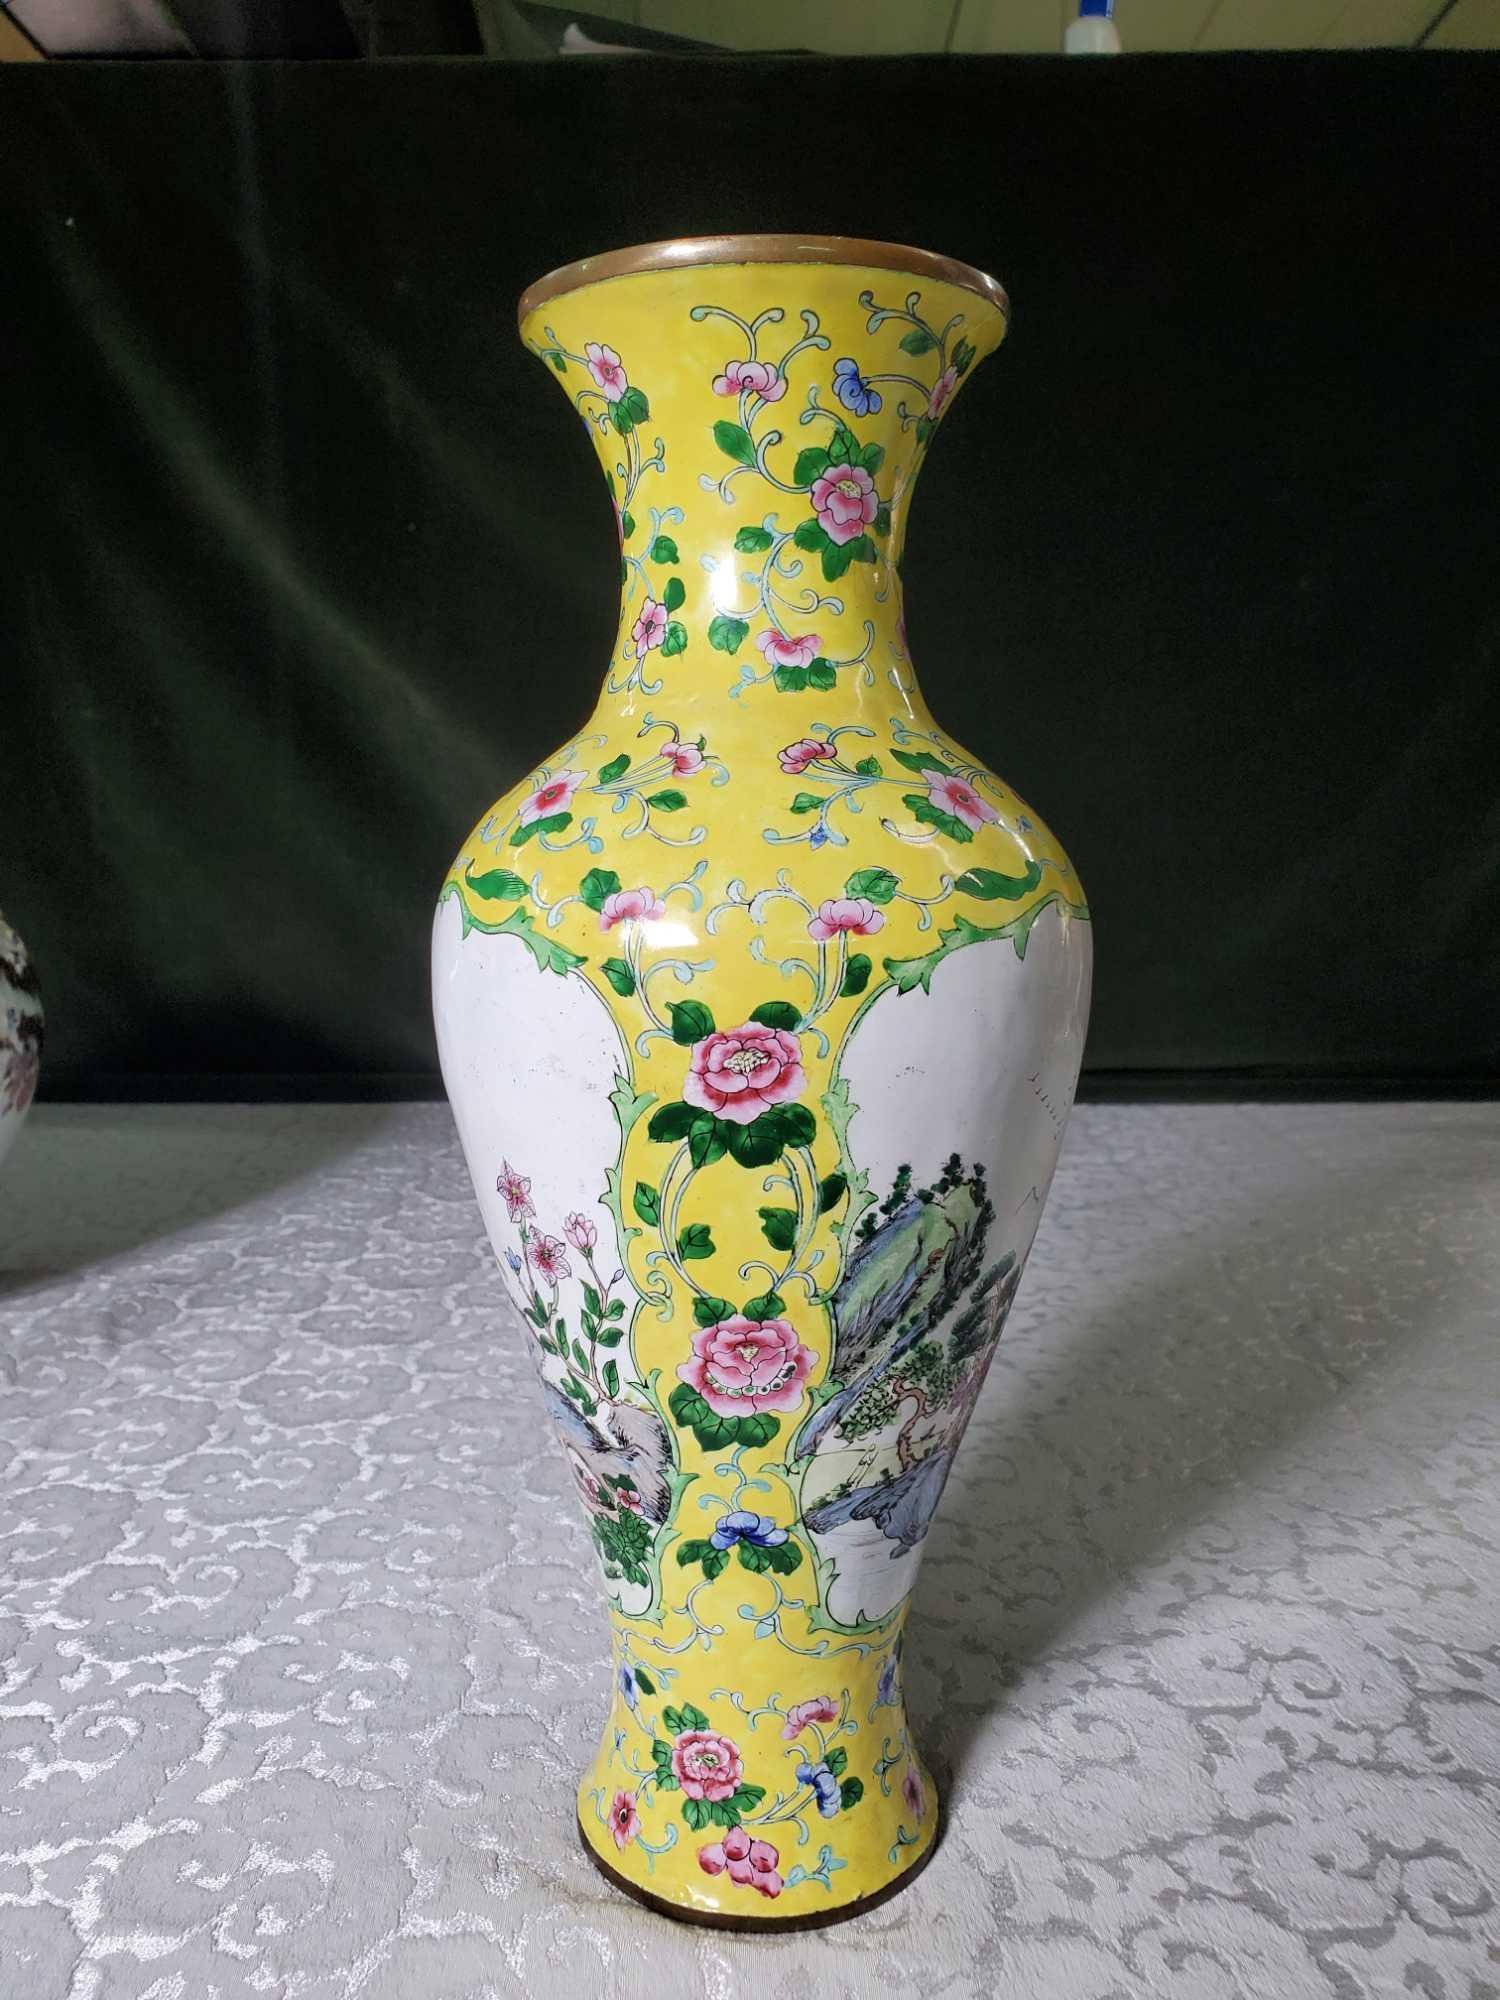 3 Chinese Porcelain and Enamel Decorated Vases